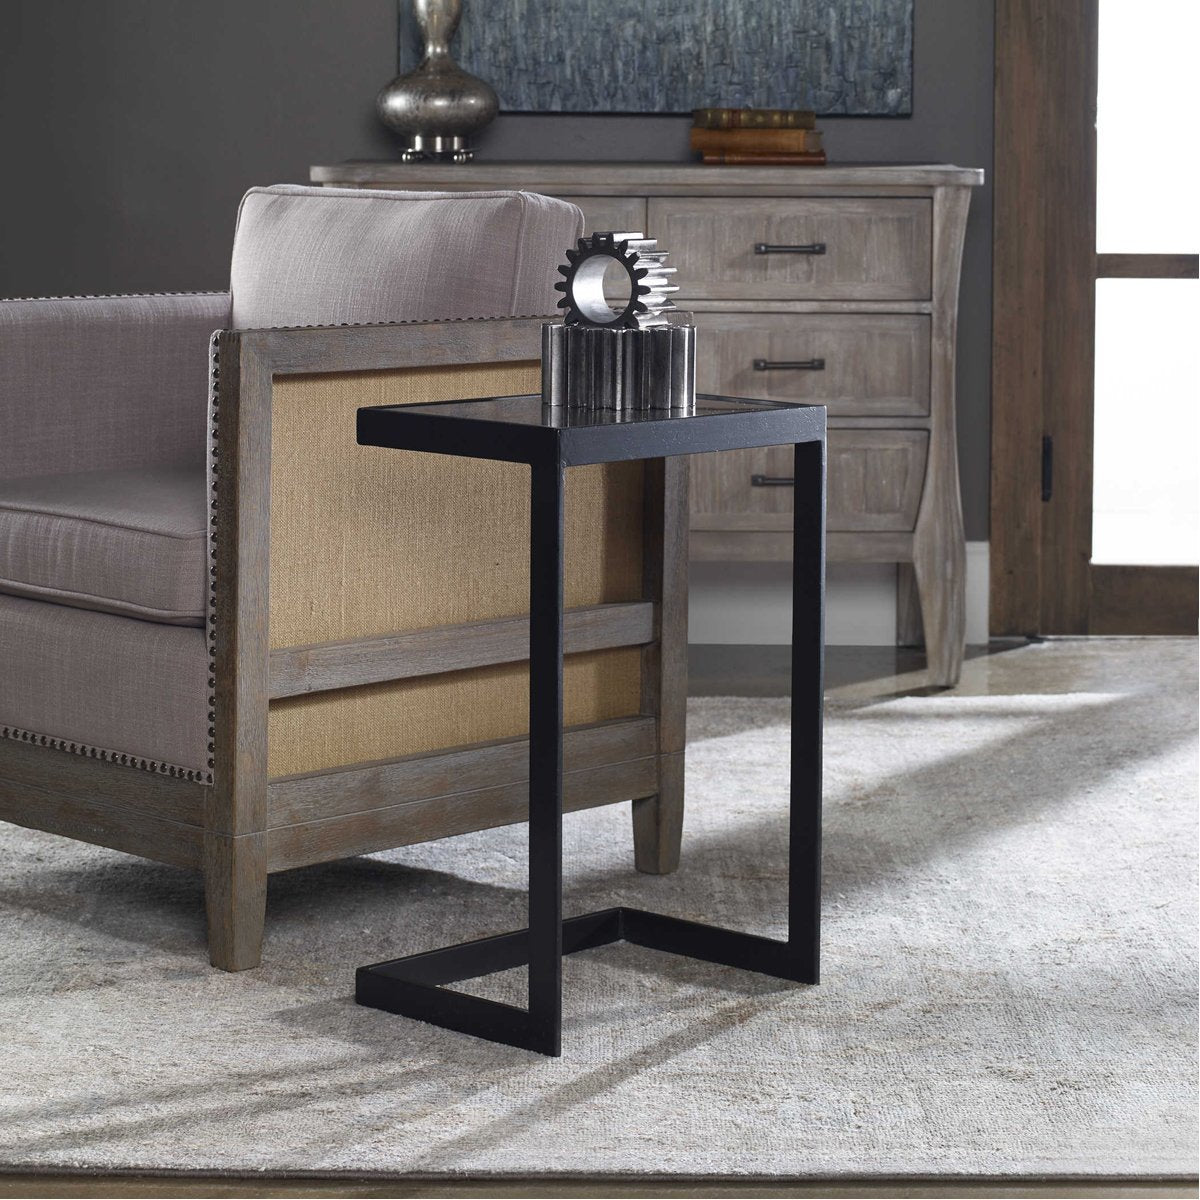 Uttermost Windell Cantilever Accent Table